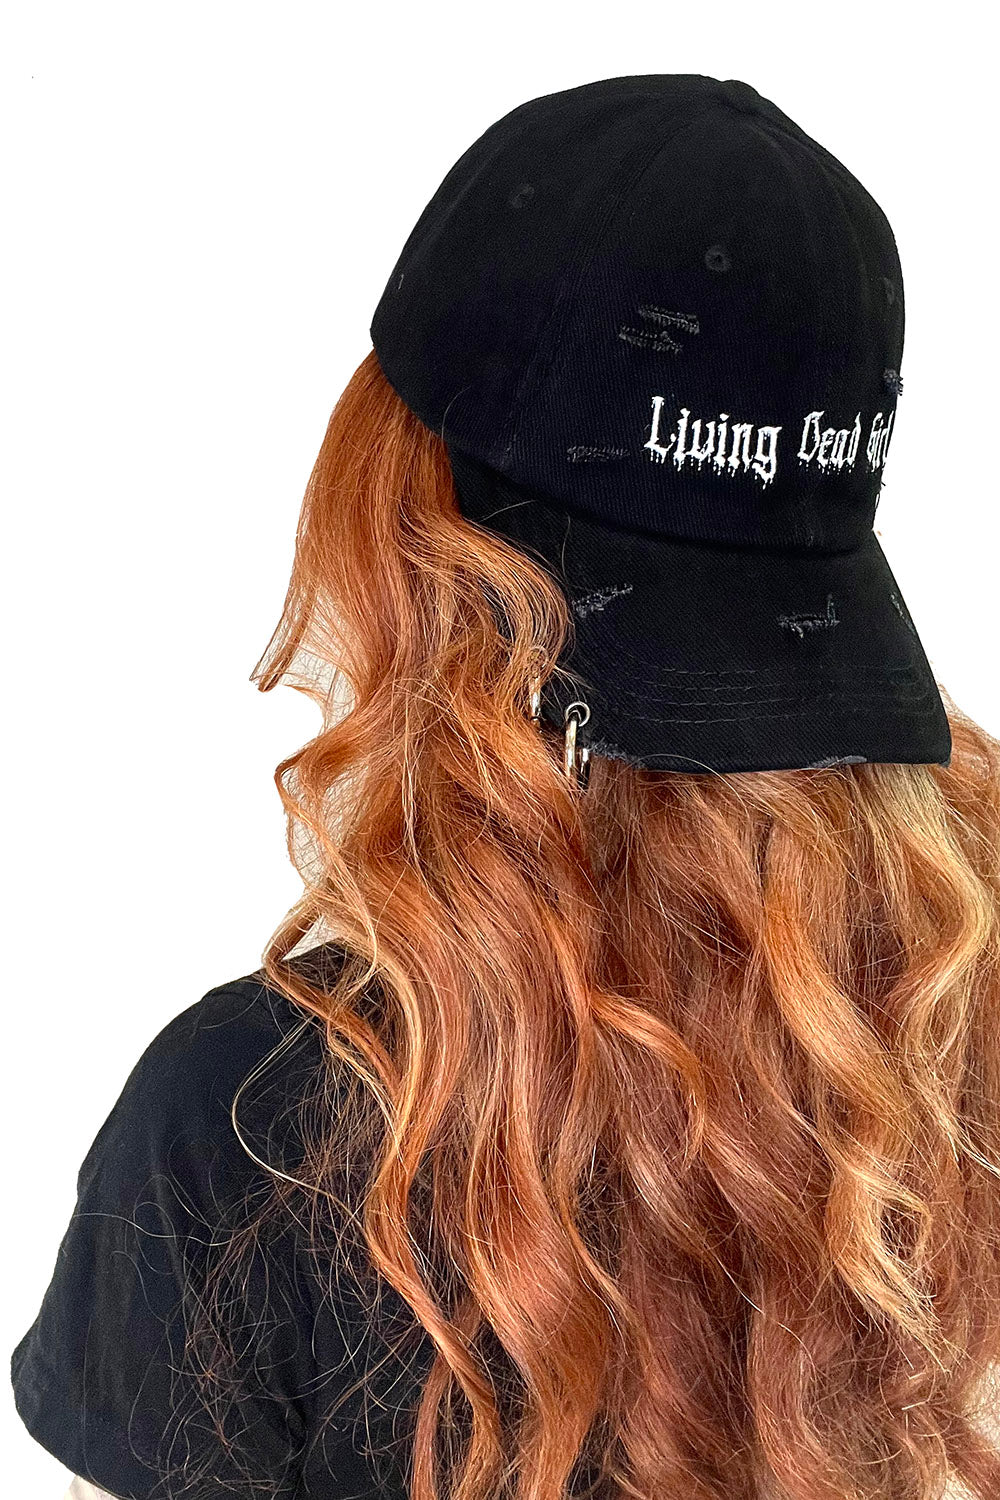 embroidered gothic cap